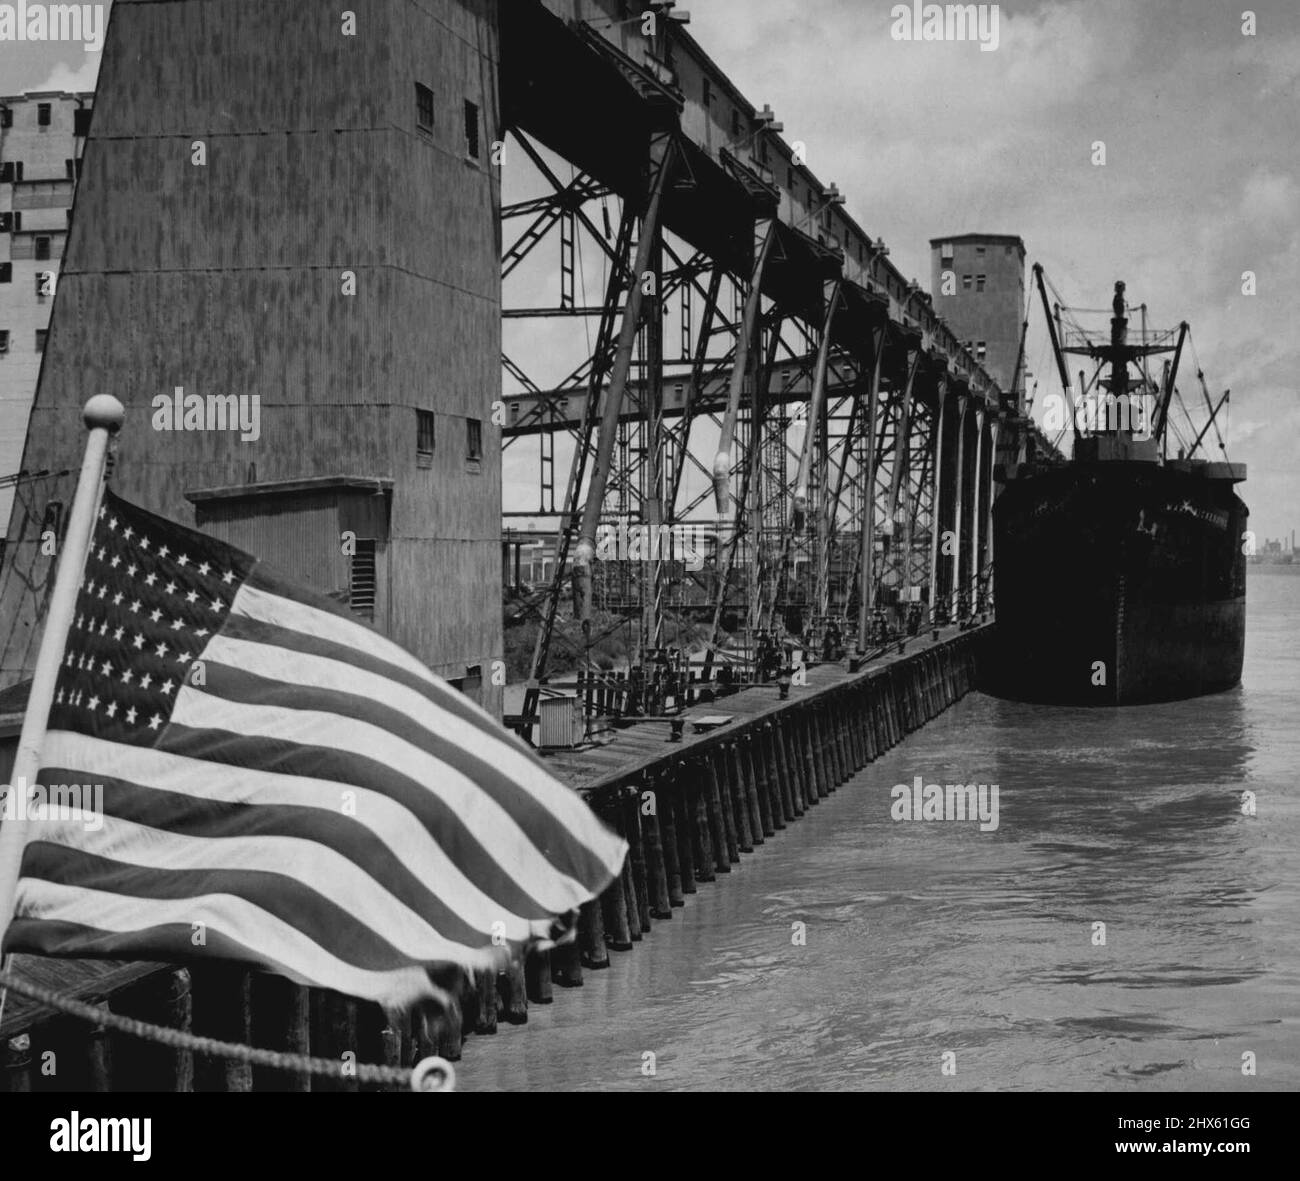 Awaiting Full Cargo -- Tied to pier beside the grain elevator at New Orleans, La., a foreign bound ship waits for full cargo to be placed aboard. Grain in shipped to all parts of the world from this port as the United States helps to feed the starving peoples of allied as well as defeated nations. June 16, 1946. (Photo by Associated Press Photo).;Awaiting Full Cargo -- Tied to pier beside the grain elevator at New Orleans, La., a foreign bound ship waits for full cargo to be placed aboard. Grain Stock Photo